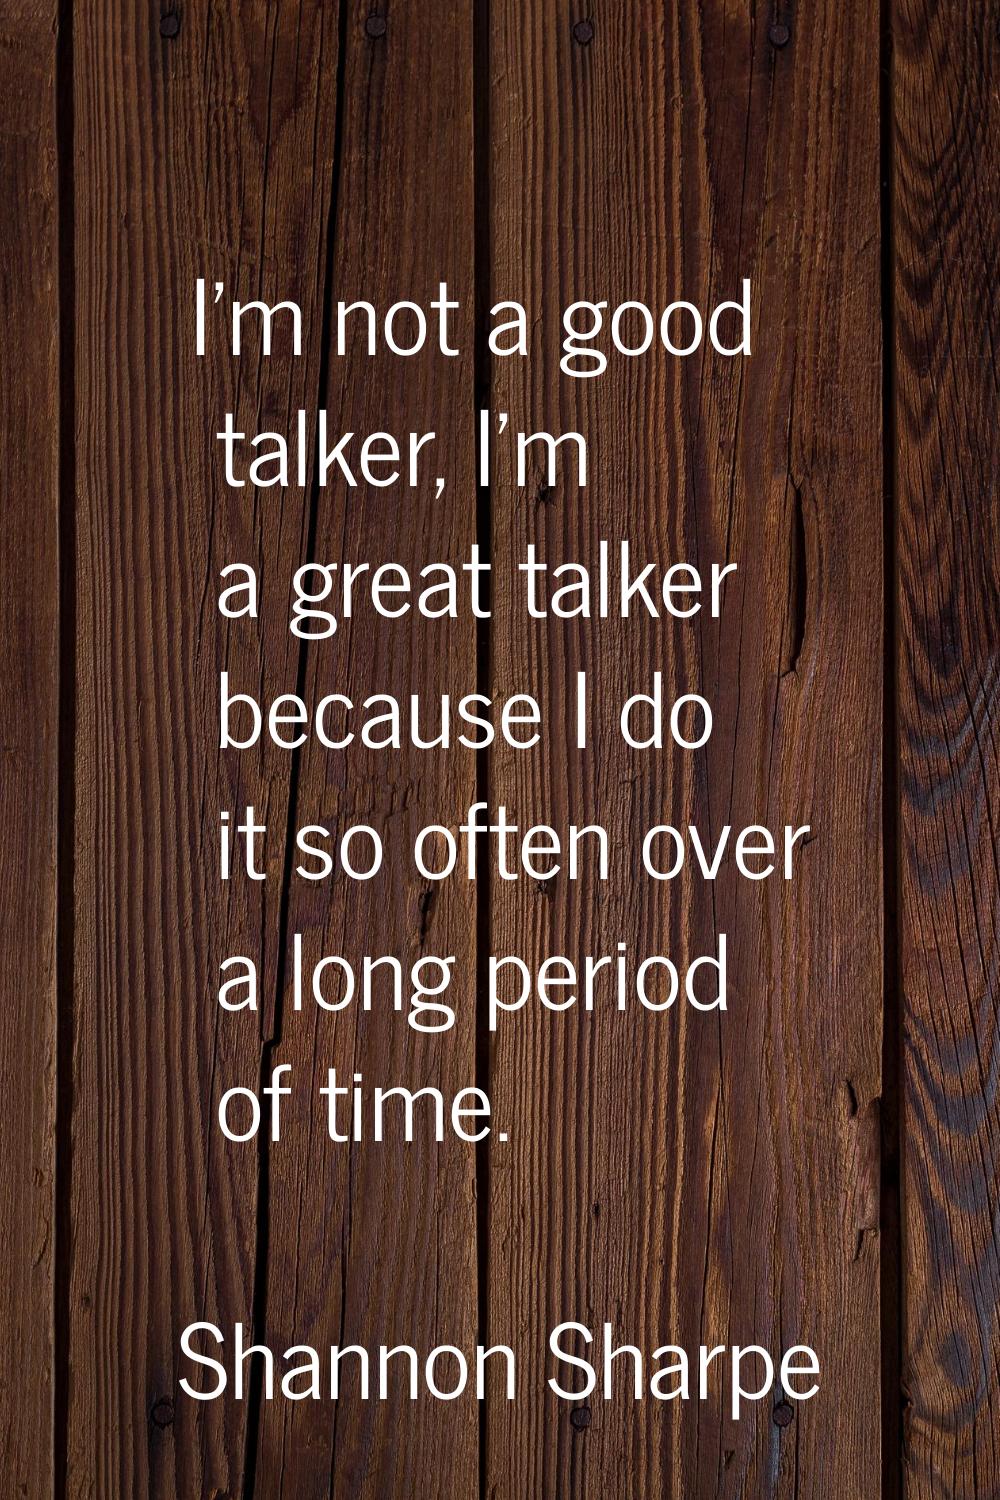 I'm not a good talker, I'm a great talker because I do it so often over a long period of time.